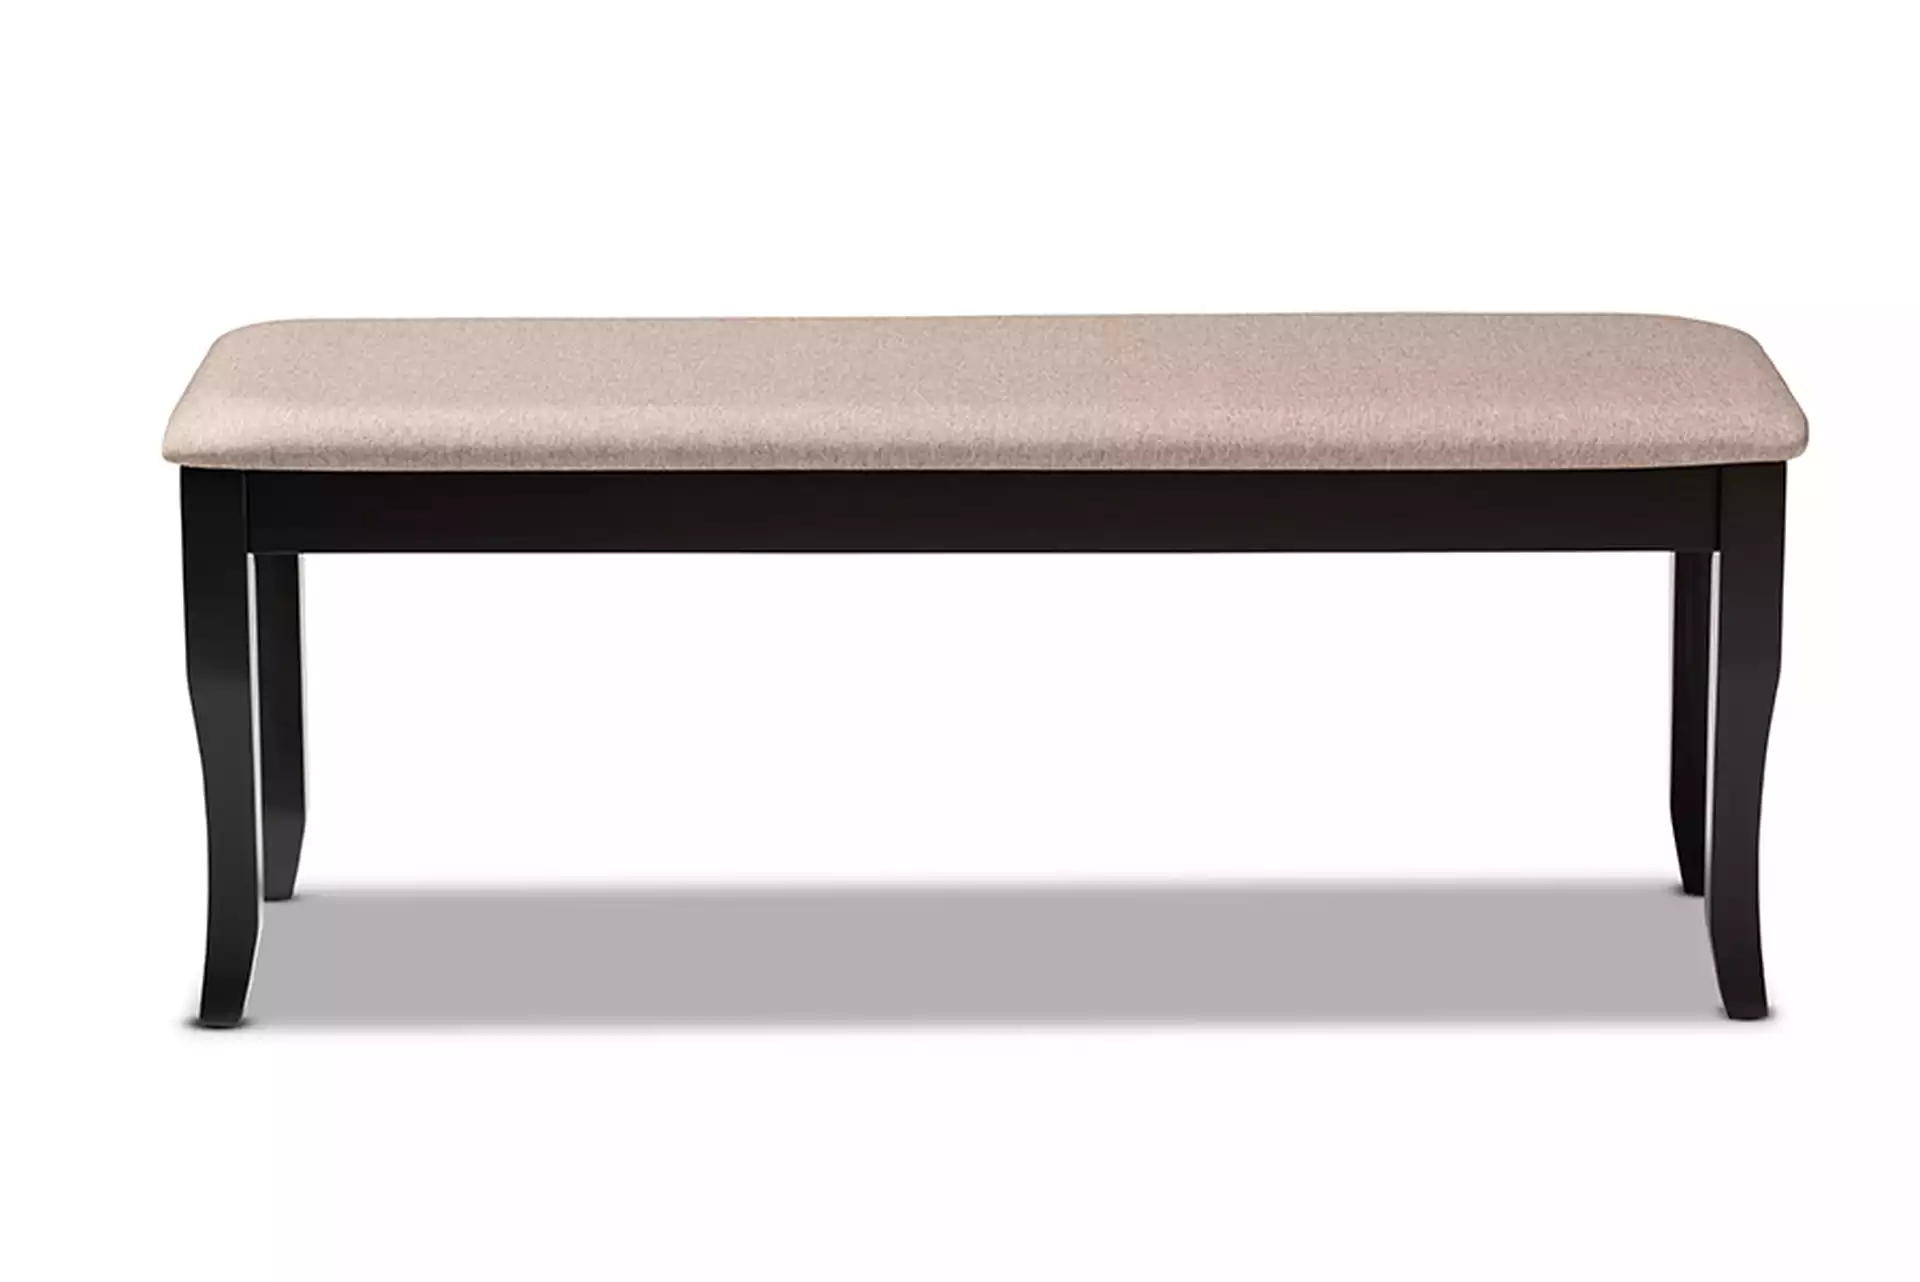 Cornelie Modern and Contemporary Transitional Sand Fabric Upholstered and Dark Brown Finished Wood Dining Bench